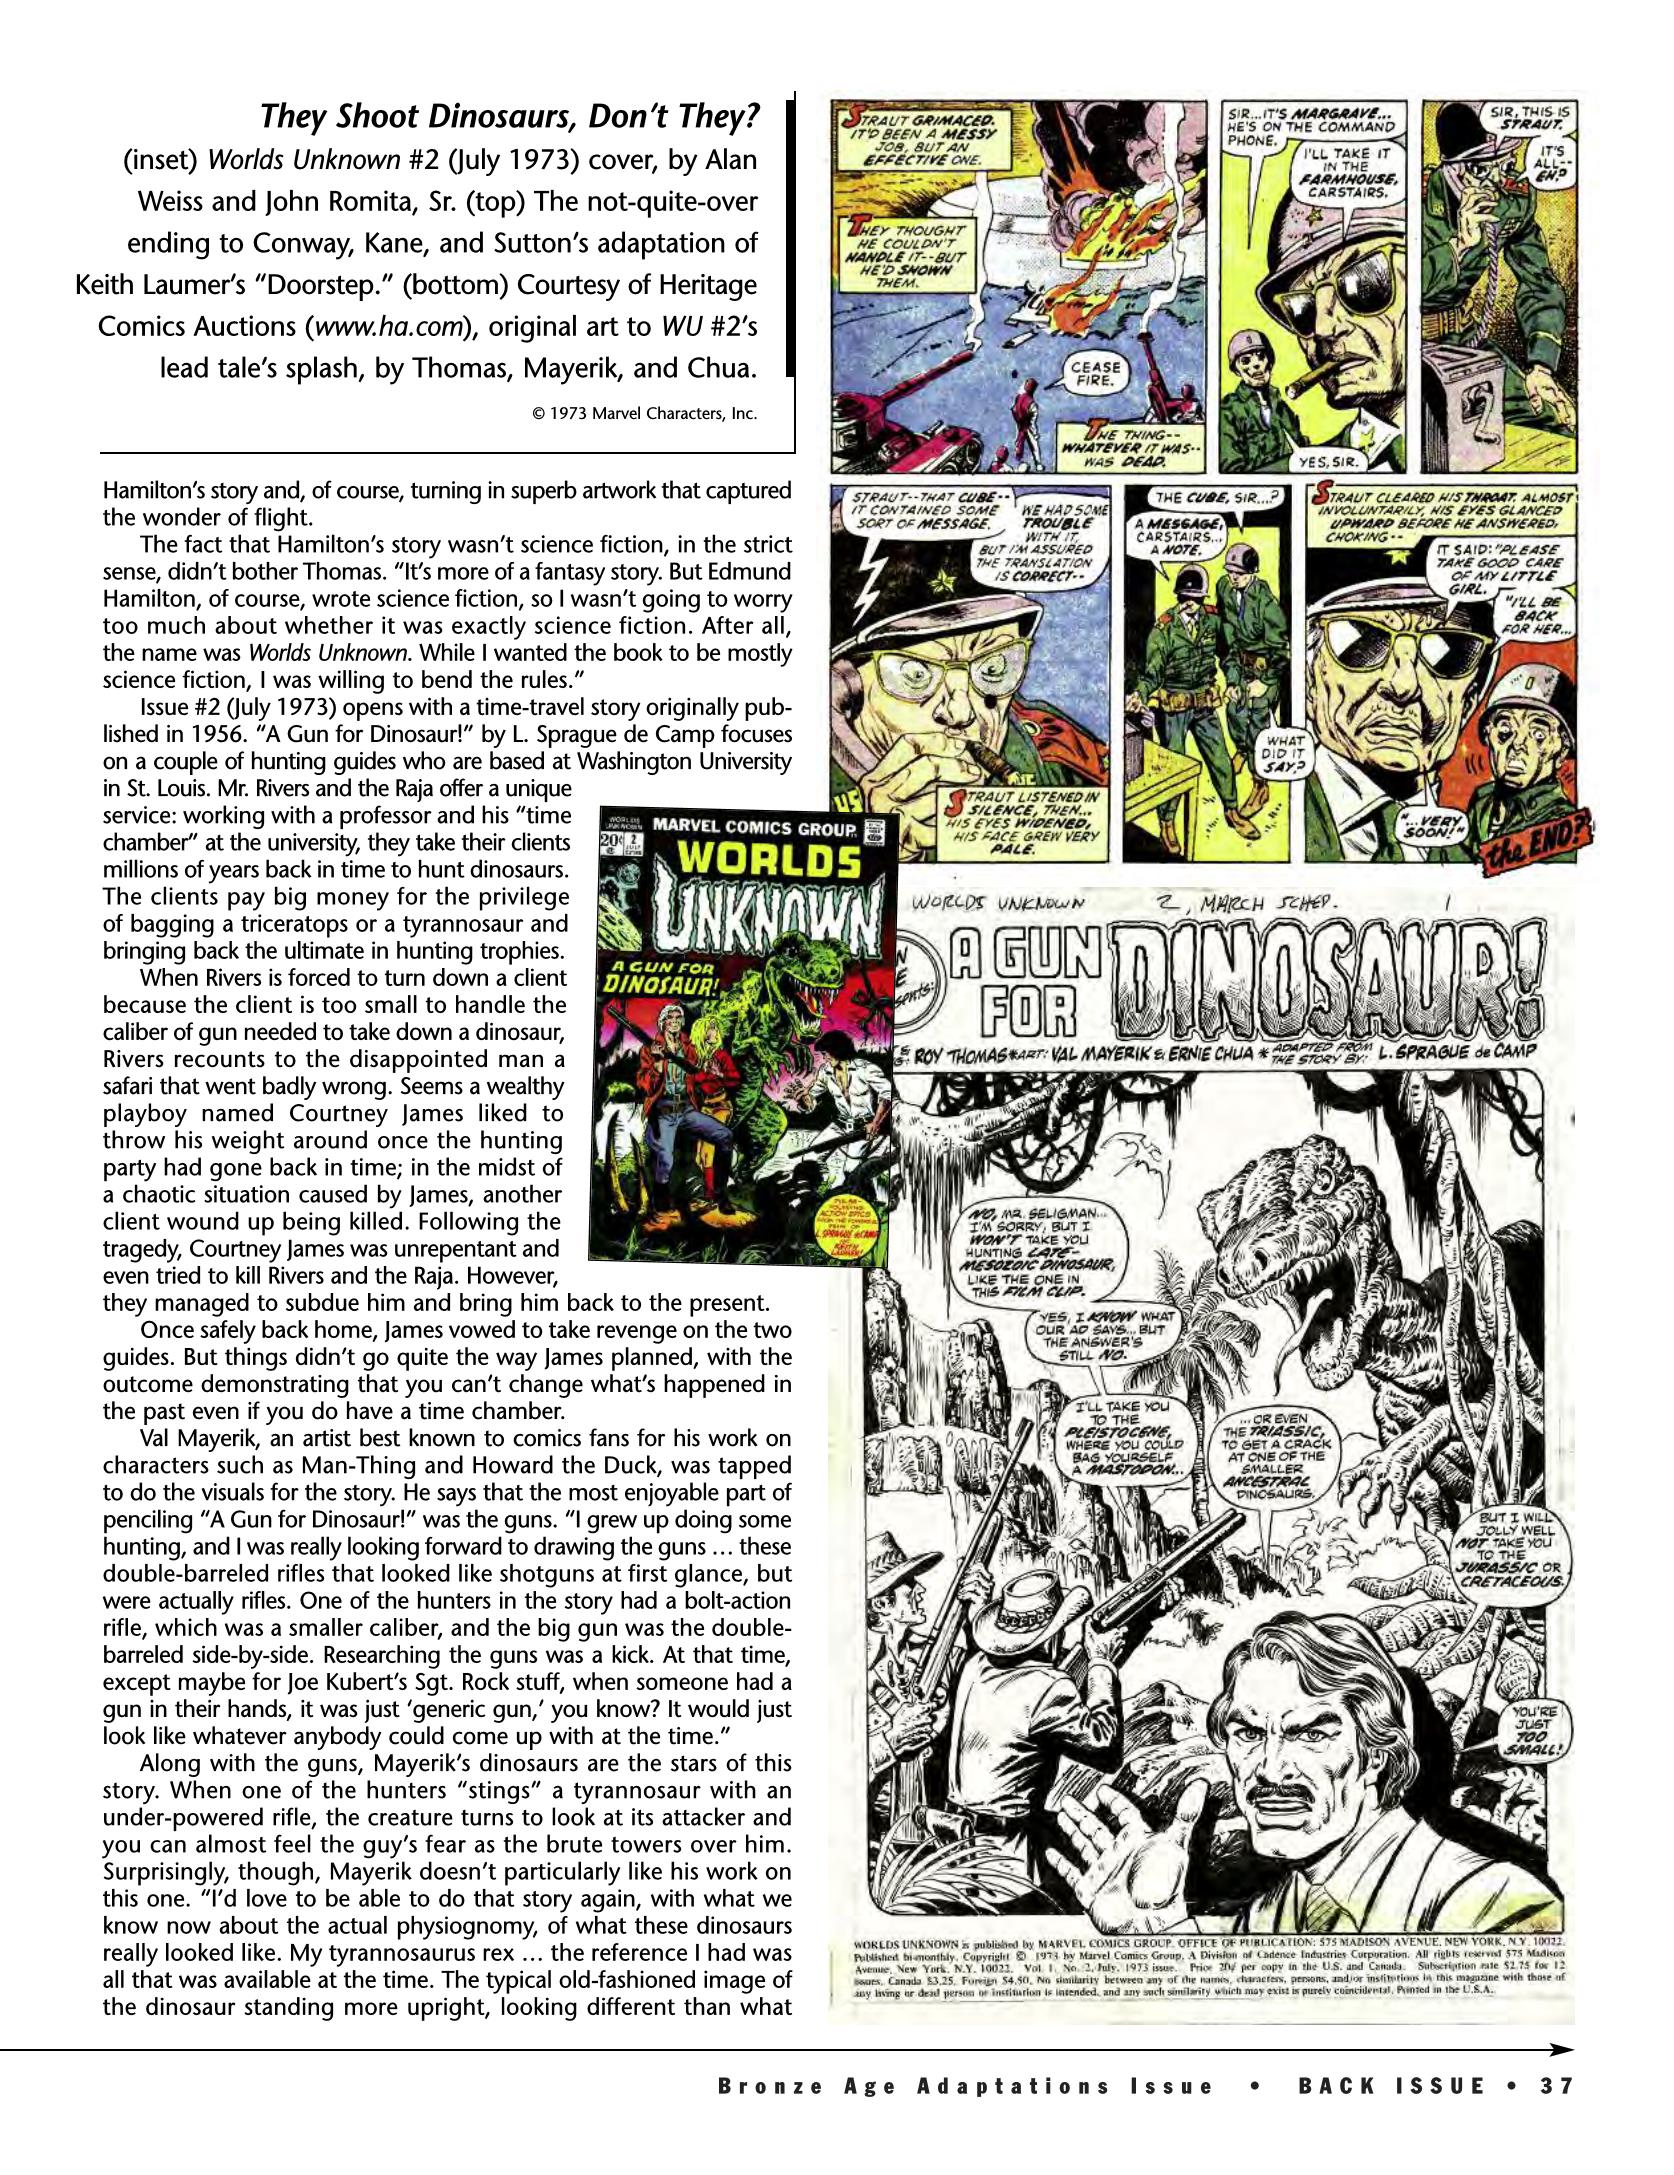 Read online Back Issue comic -  Issue #89 - 33